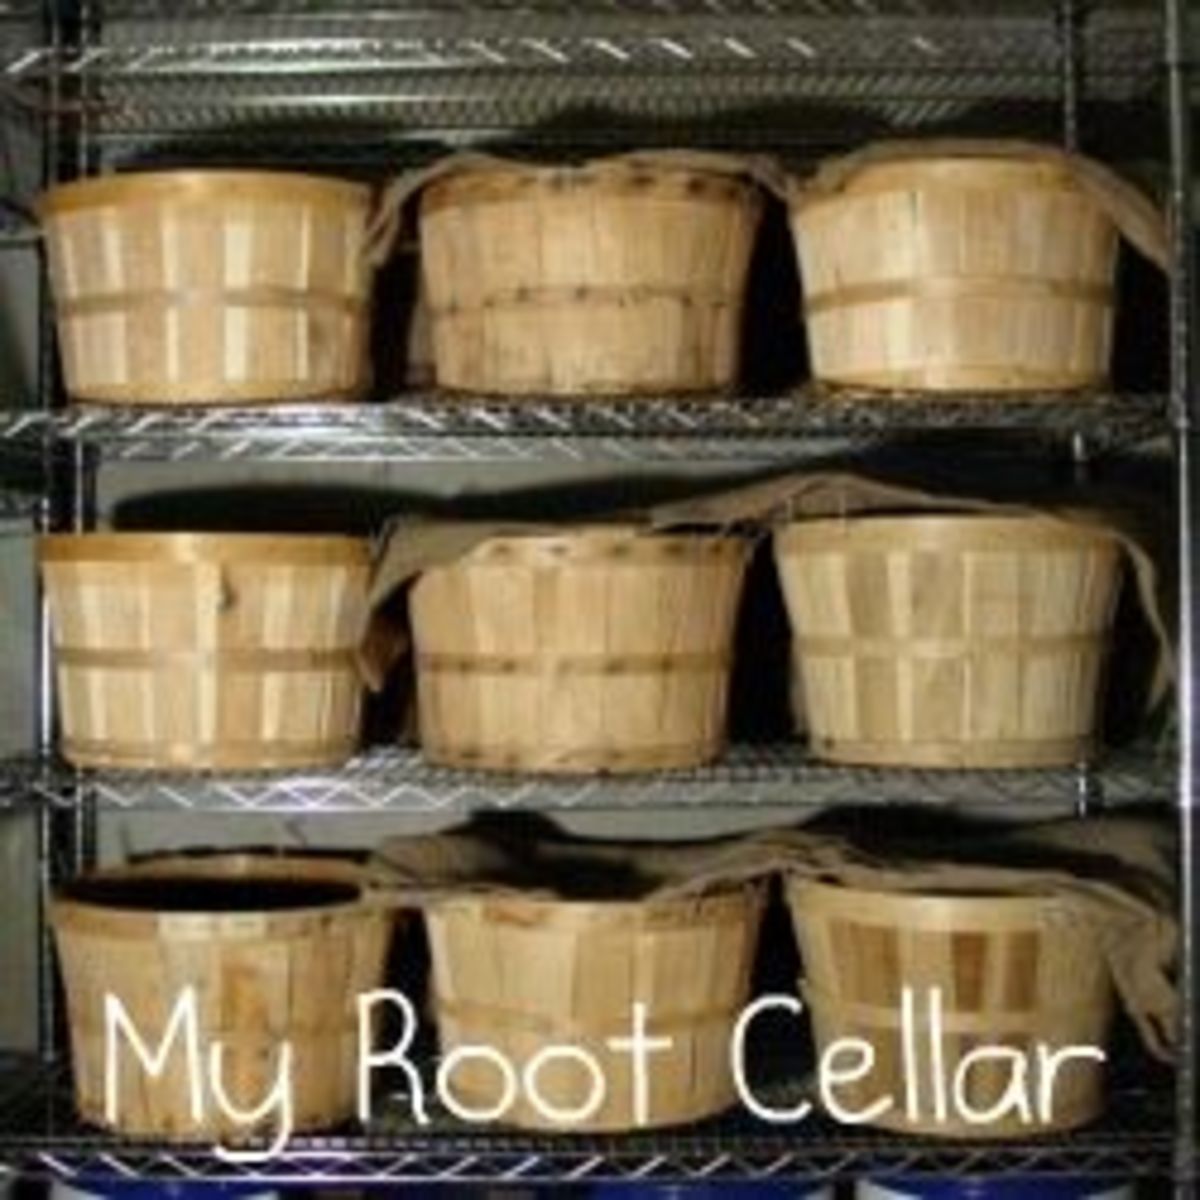 Learn how to plan and build your own underground root cellar